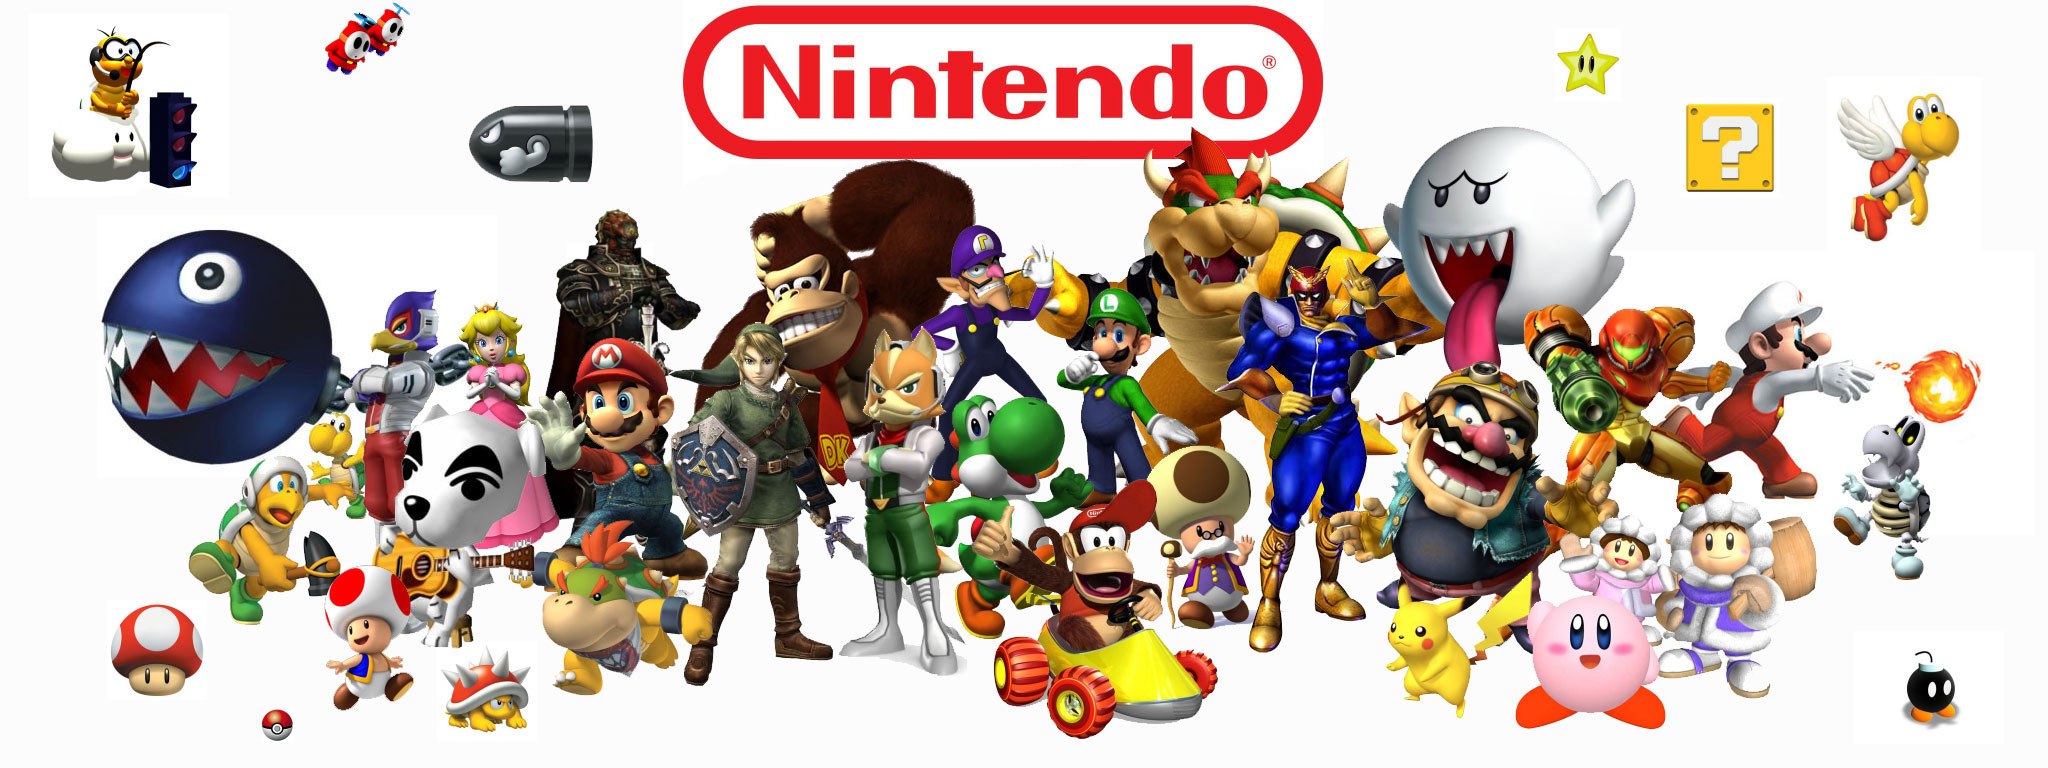 Free Download Nintendo Story News Old School Games Fans Mod Db 2048x768 For Your Desktop Mobile Tablet Explore 47 Nintendo Characters Wallpaper Bayonetta Wallpaper Super Mario Wallpaper Nintendo Wallpaper Hd